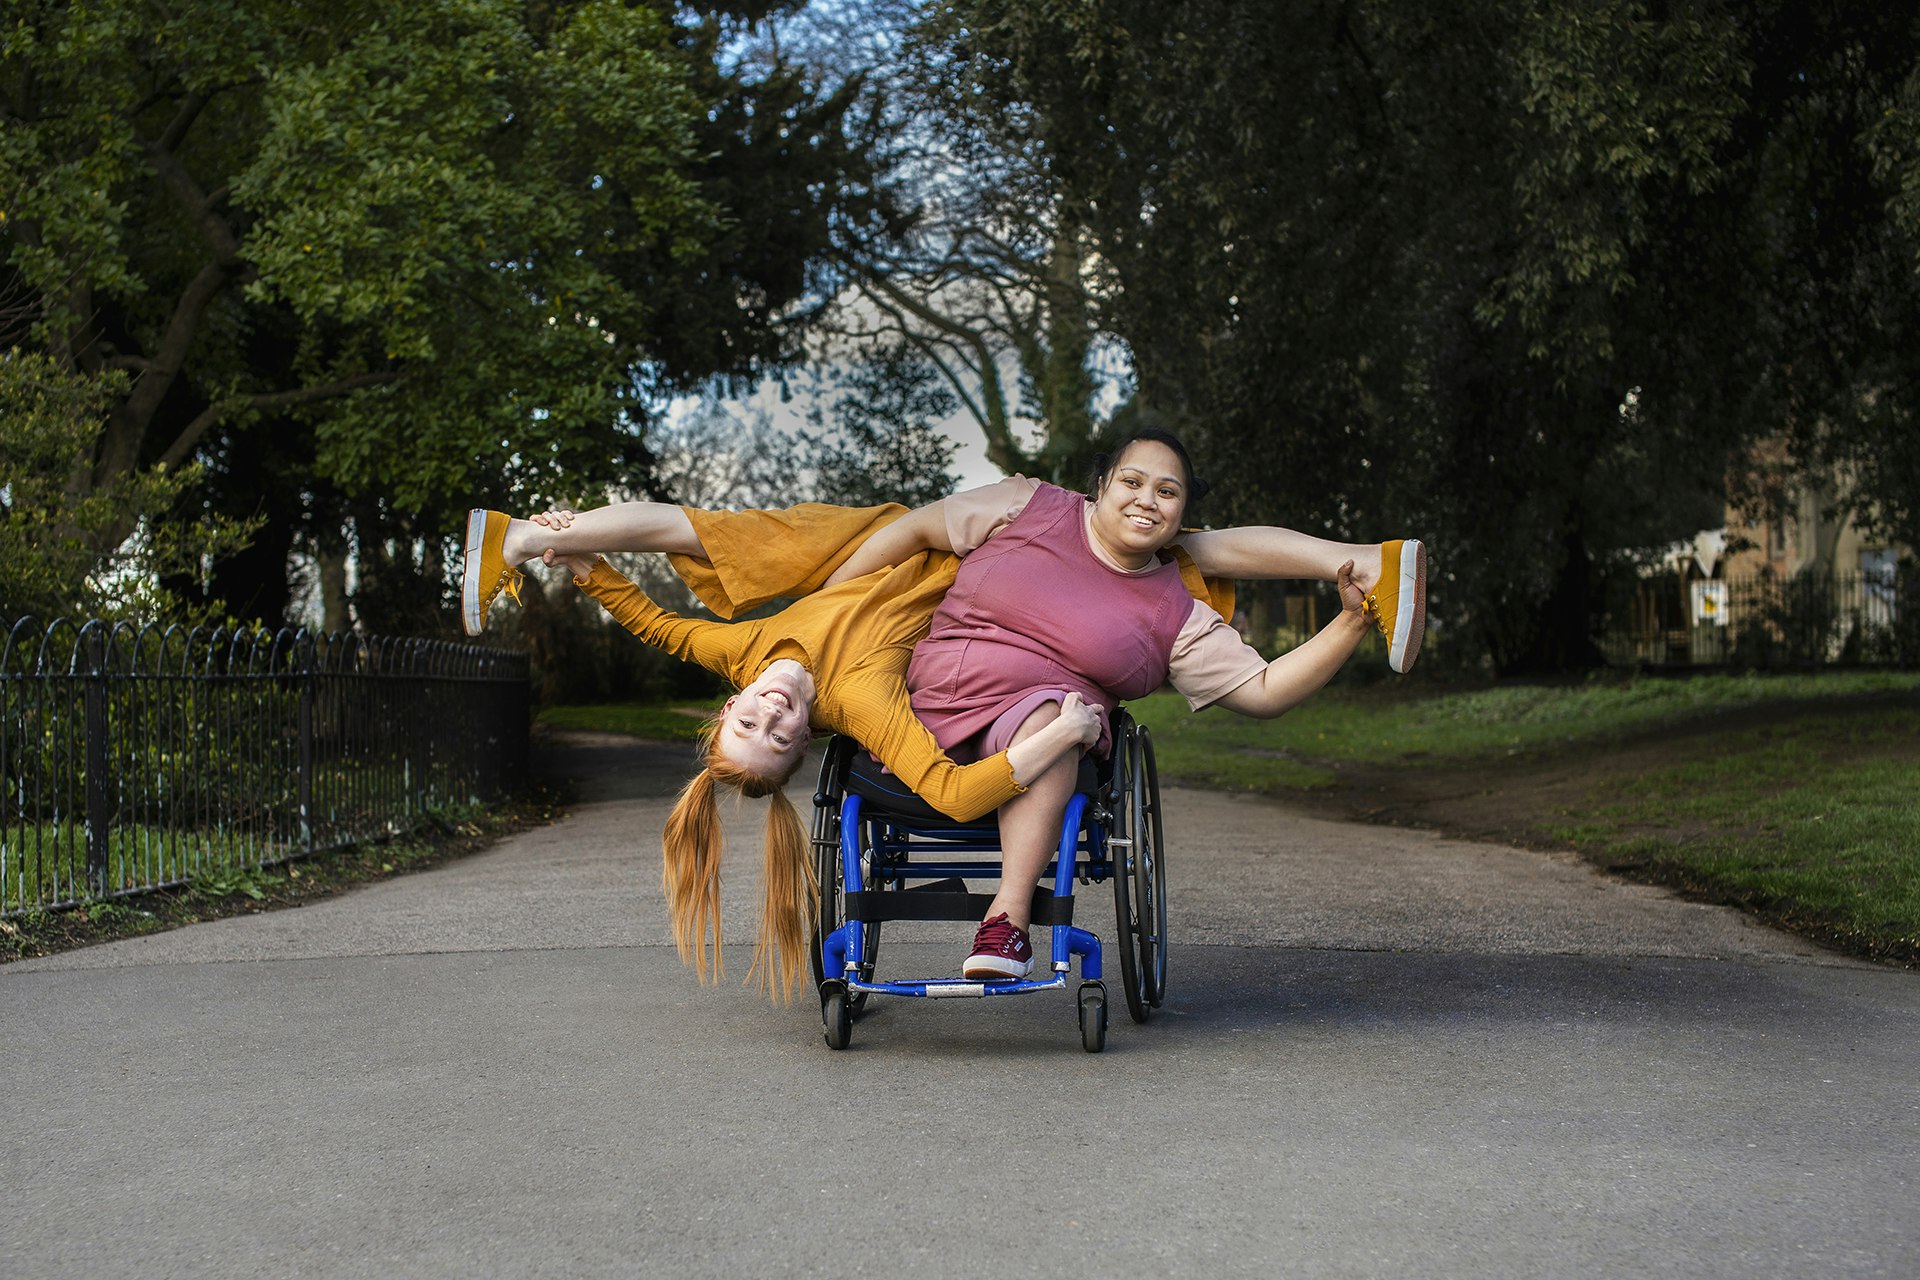 Two people smile at the camera, central to the image on a grey path. One person is a wheelchair dancer who sits in a blue wheelchair wearing purple. The other person wears a yellow dungarees and is upside down in the image. She works with the other performer to balance upside down on the wheelchair facing the camera.